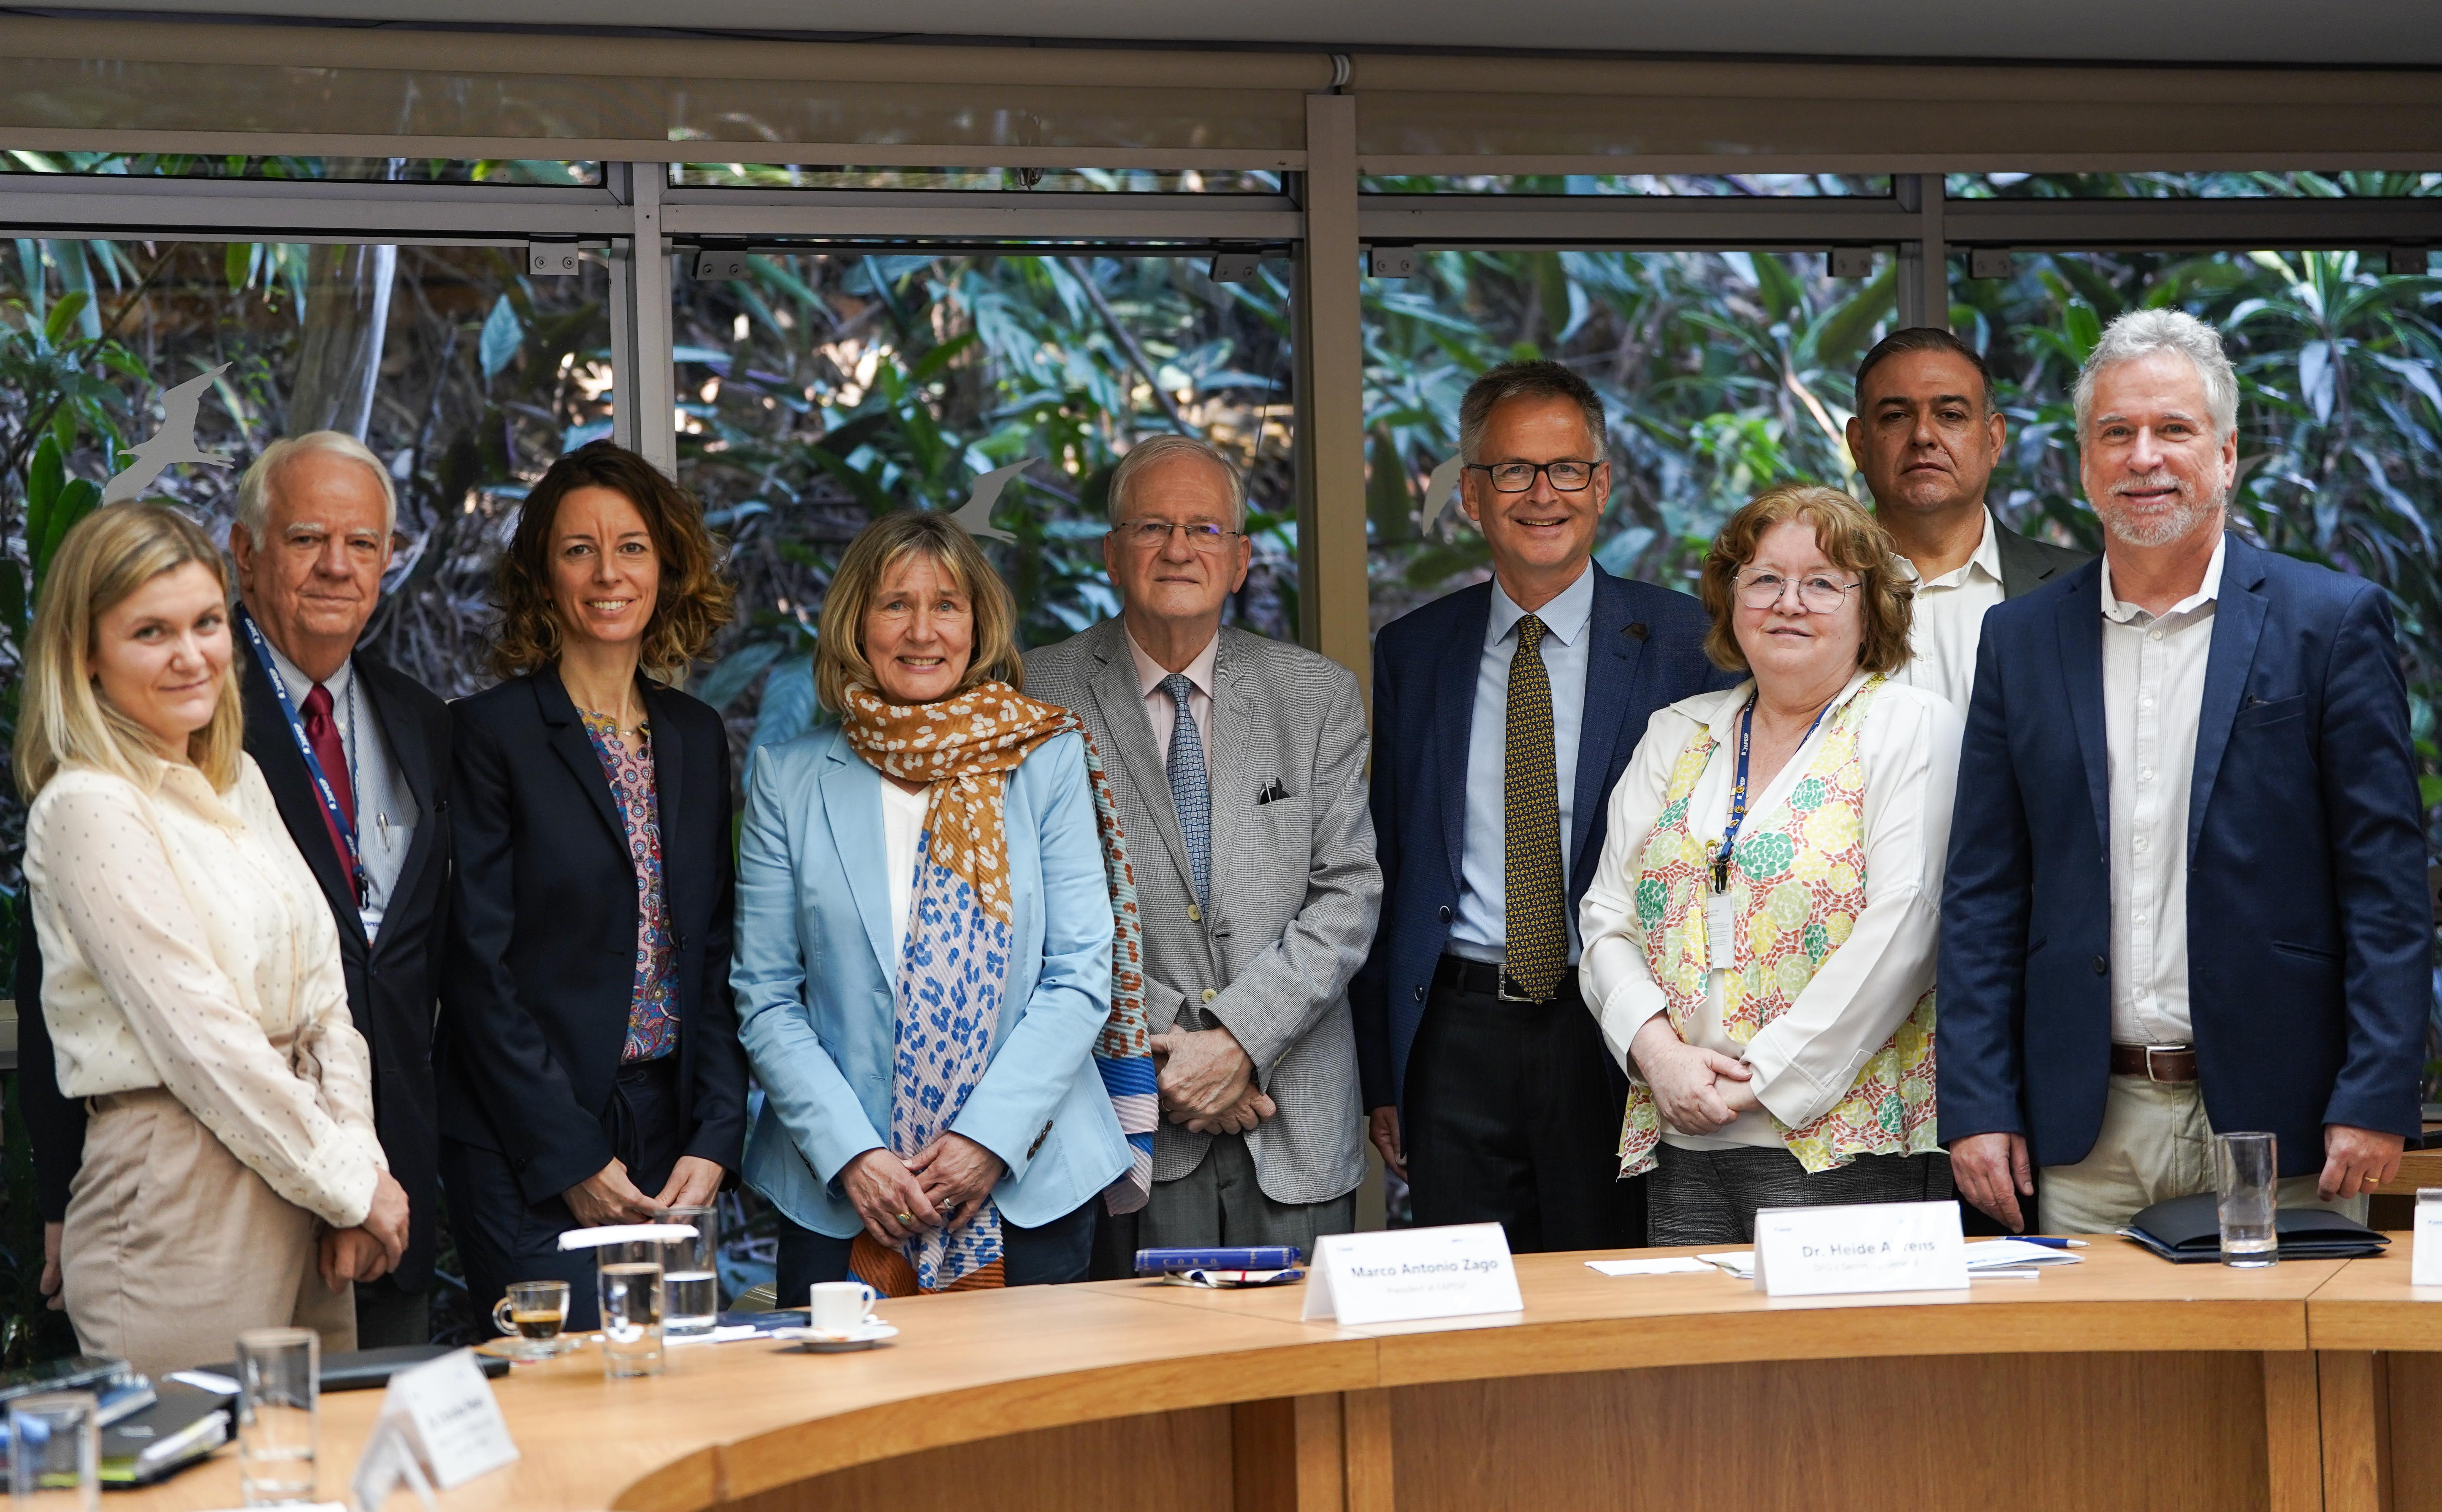 Representatives of German Research Foundation visit FAPESP to discuss research collaboration